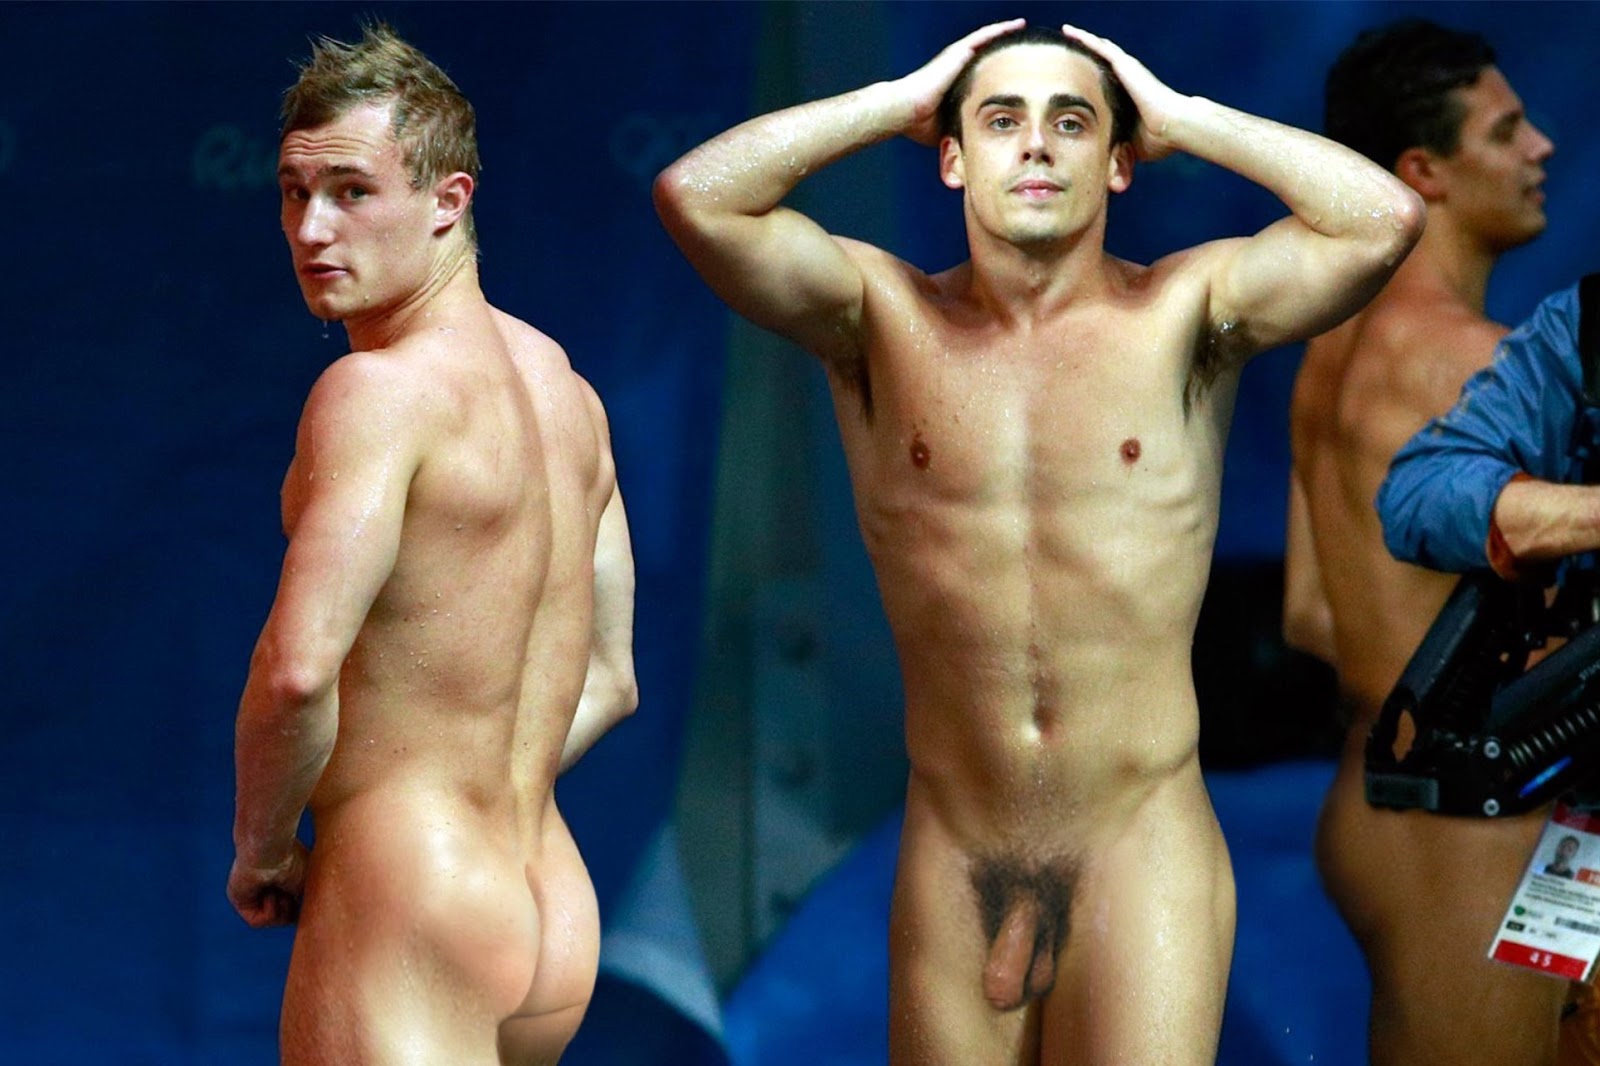 Chris mears nackt.